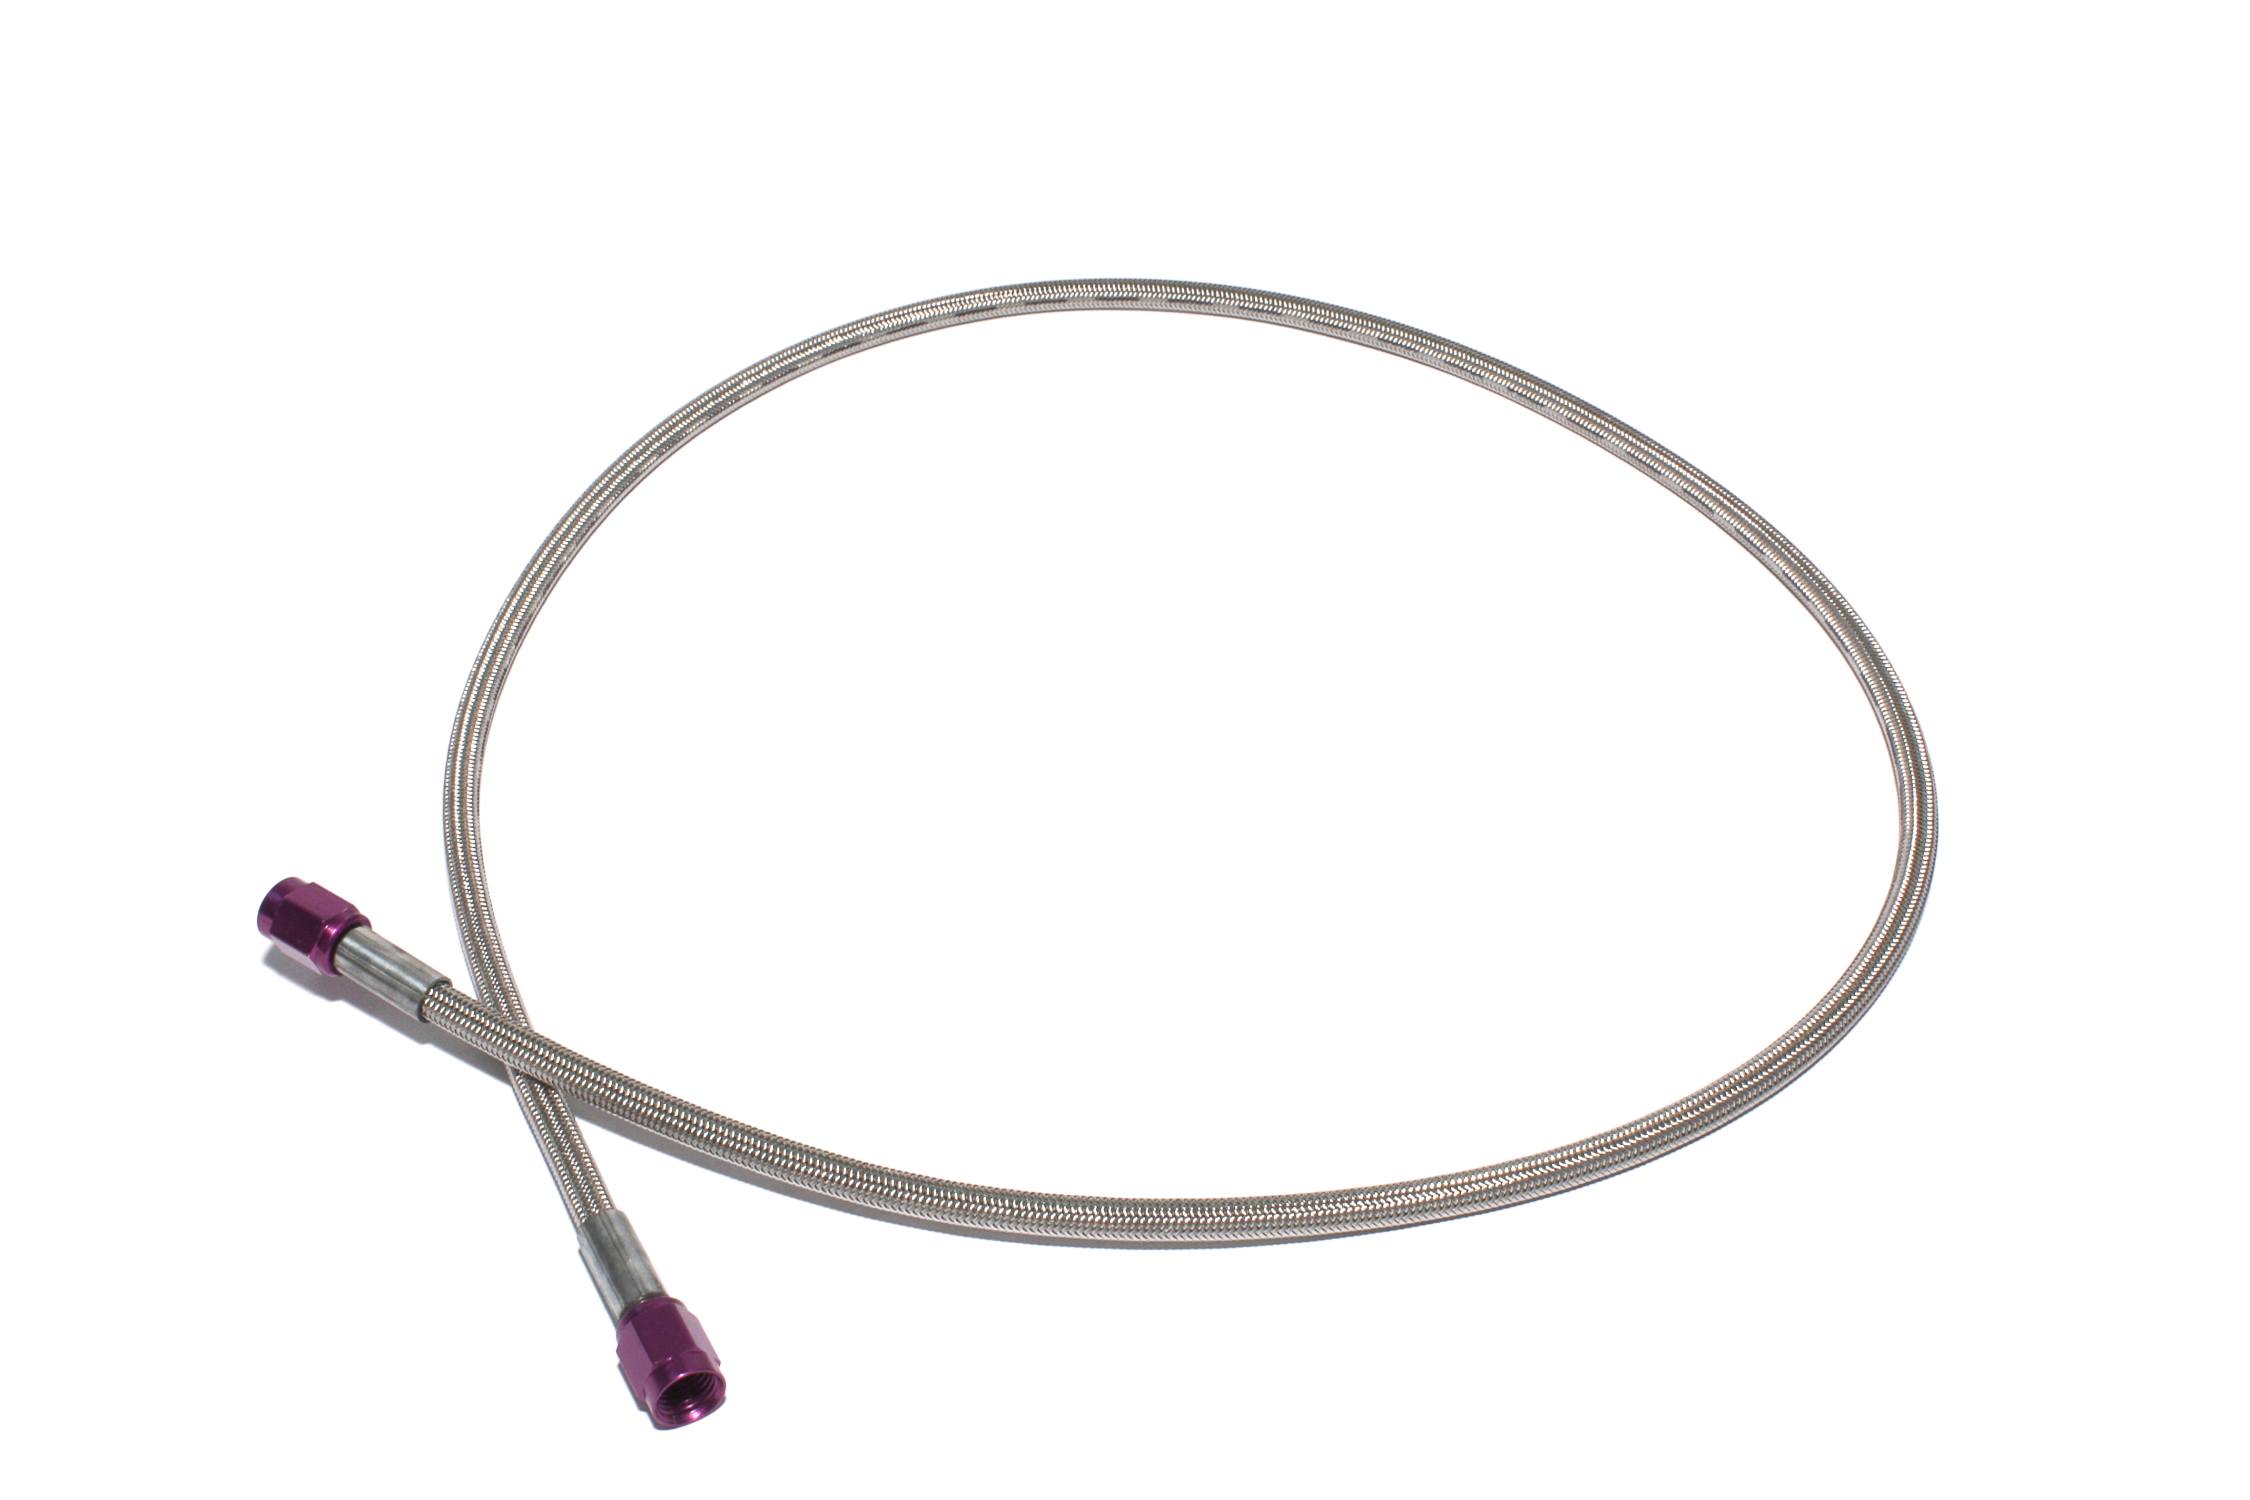 ZEX 24" (2 FT) Long -3AN Braided Hose with Purple Ends., 3AN 24", Corvette, Camaro and others